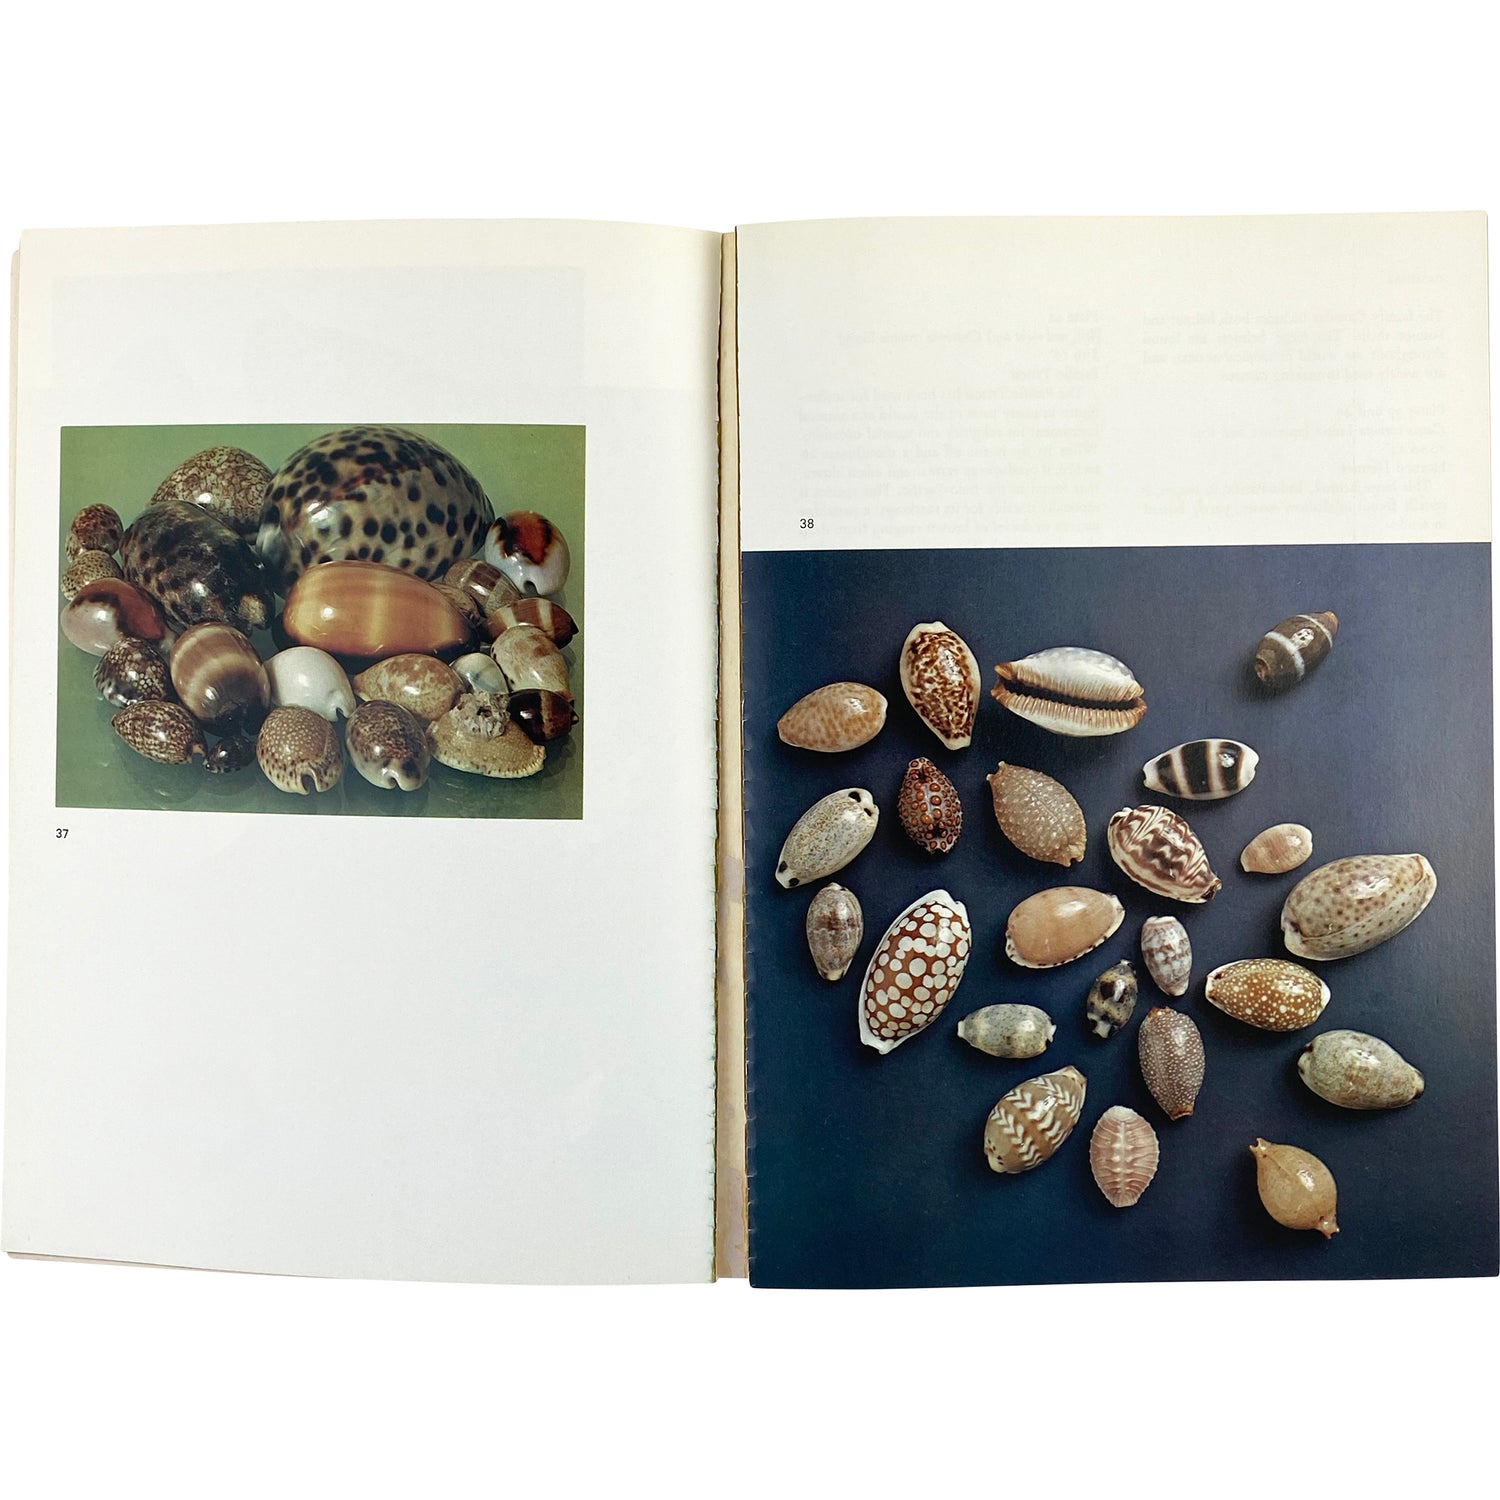 THE SHELL - 500 MILLION YEARS OF INSPIRED DESIGN BOOK